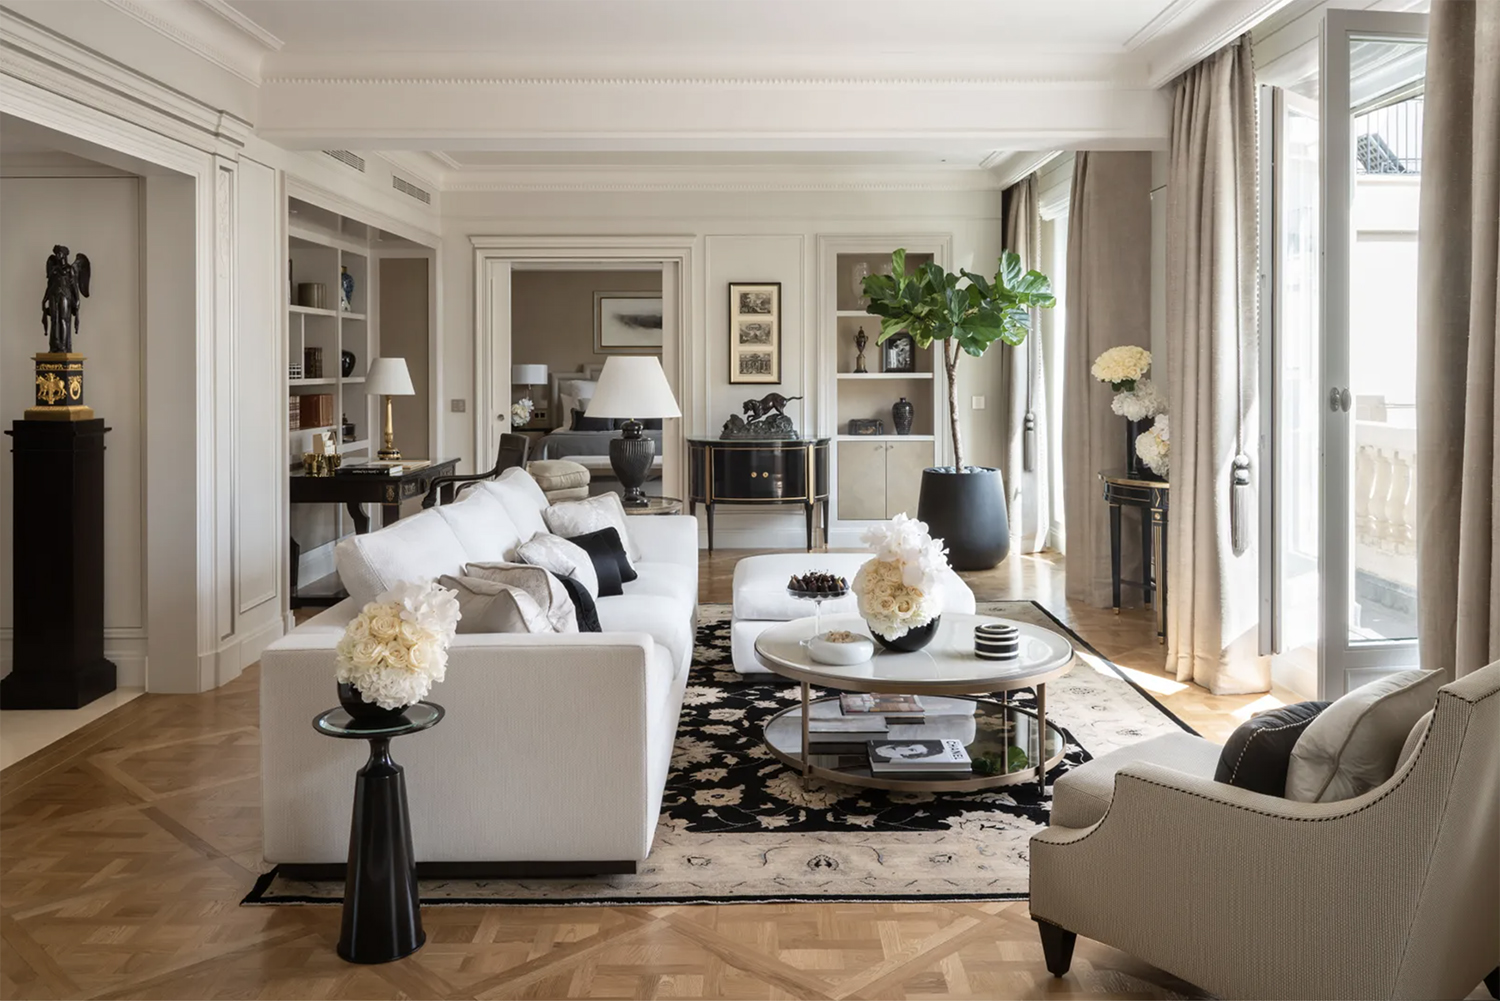 The black, white and green colored Parisian Suite at the Four Seasons Hotel George V Paris